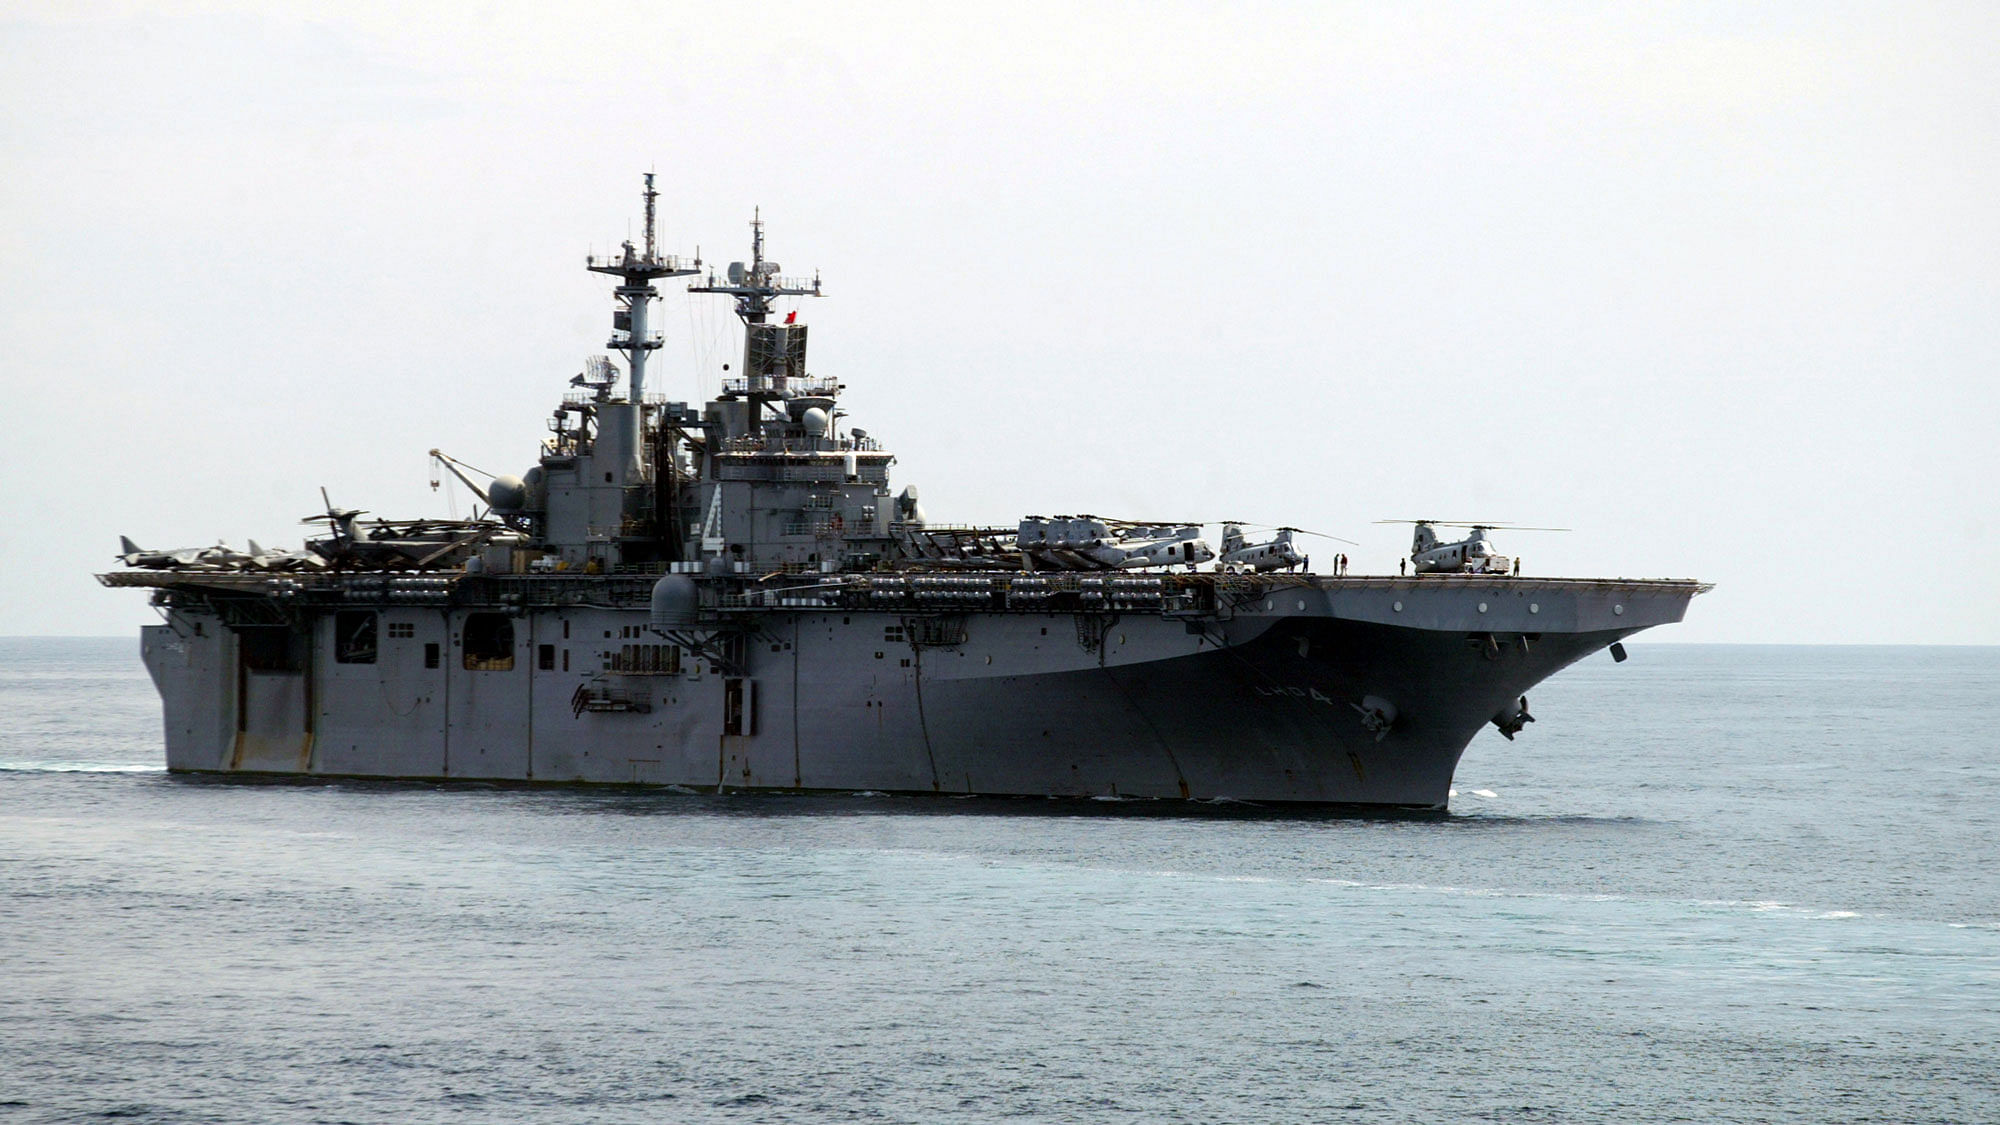 India and the US were involved in the Malabar 2006 Indo-US bilateral naval exercise which included 15 warships off the coast of Goa. (Photo: Reuters)